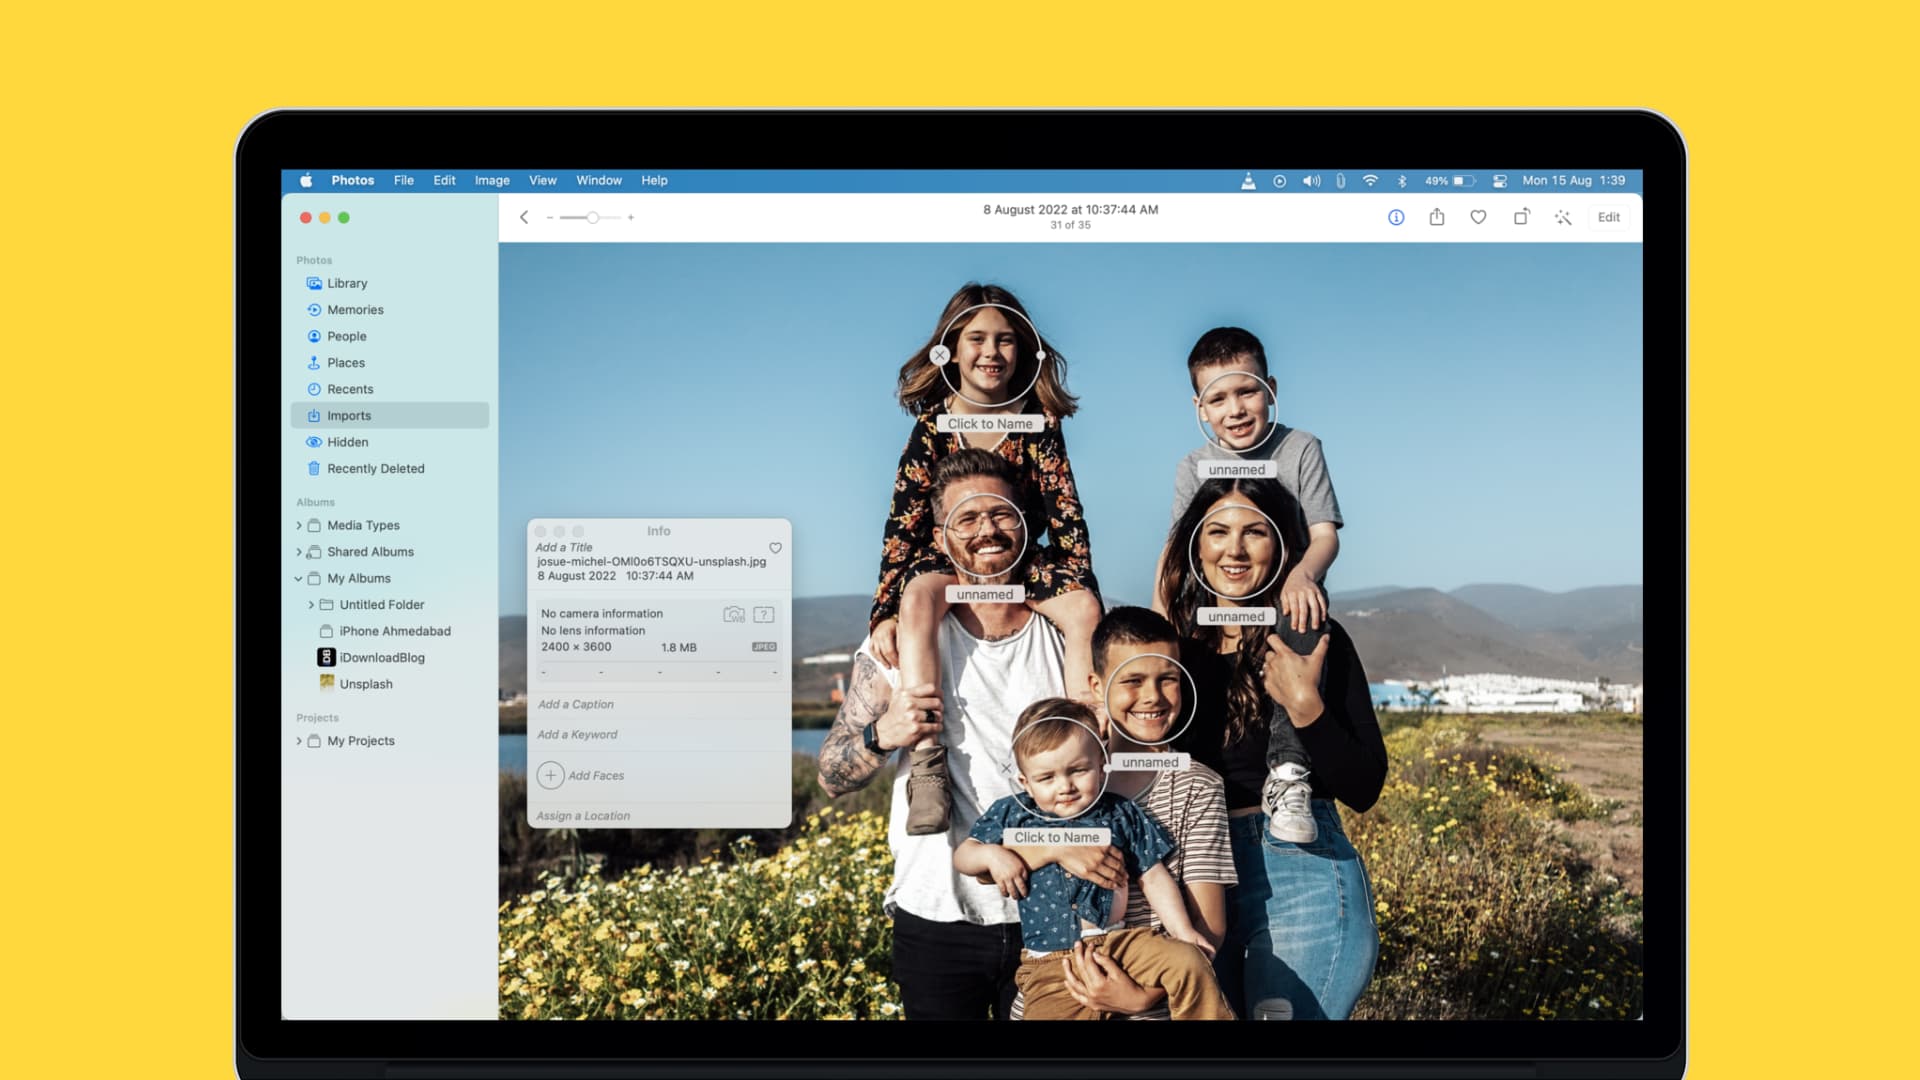 Identify and name people in the Photos app on Mac